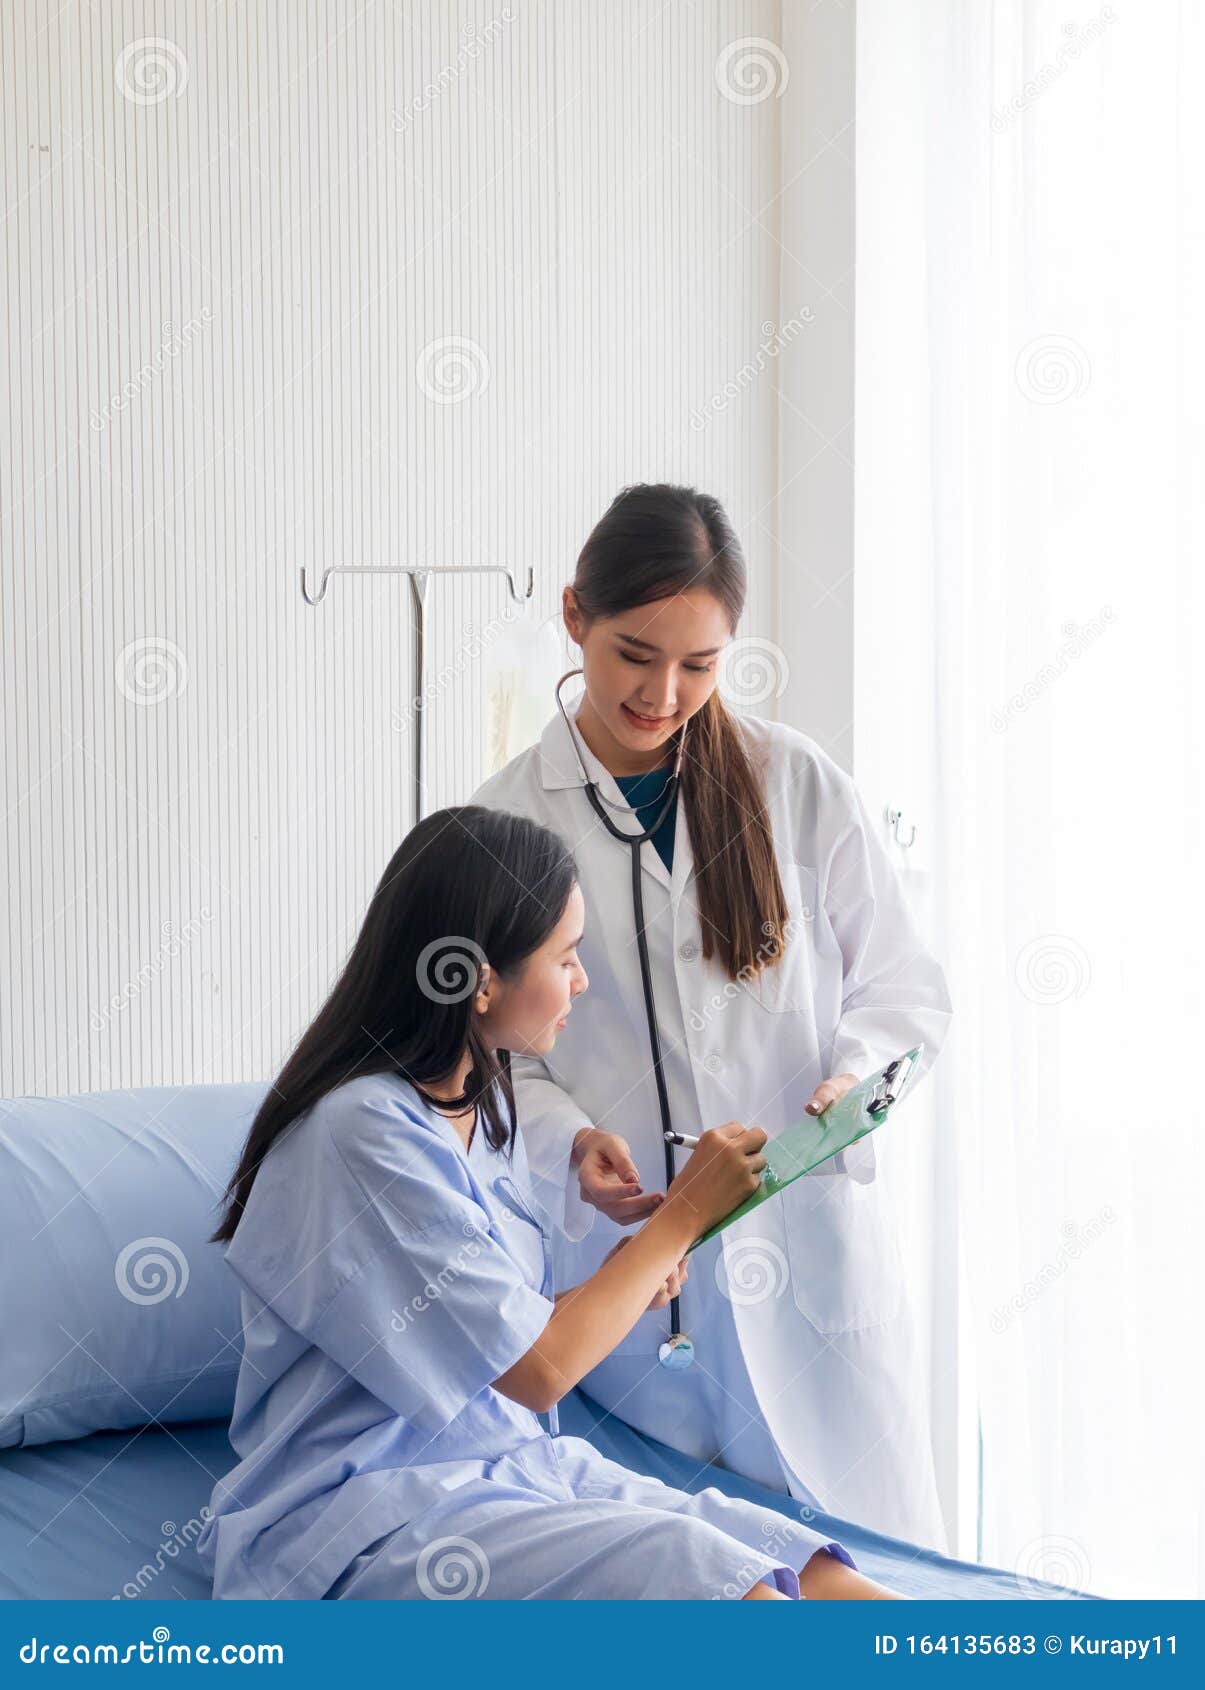 Asian Female Doctor Examined The Patient On A Bed In The Room Stock Image Image Of Lifestyle